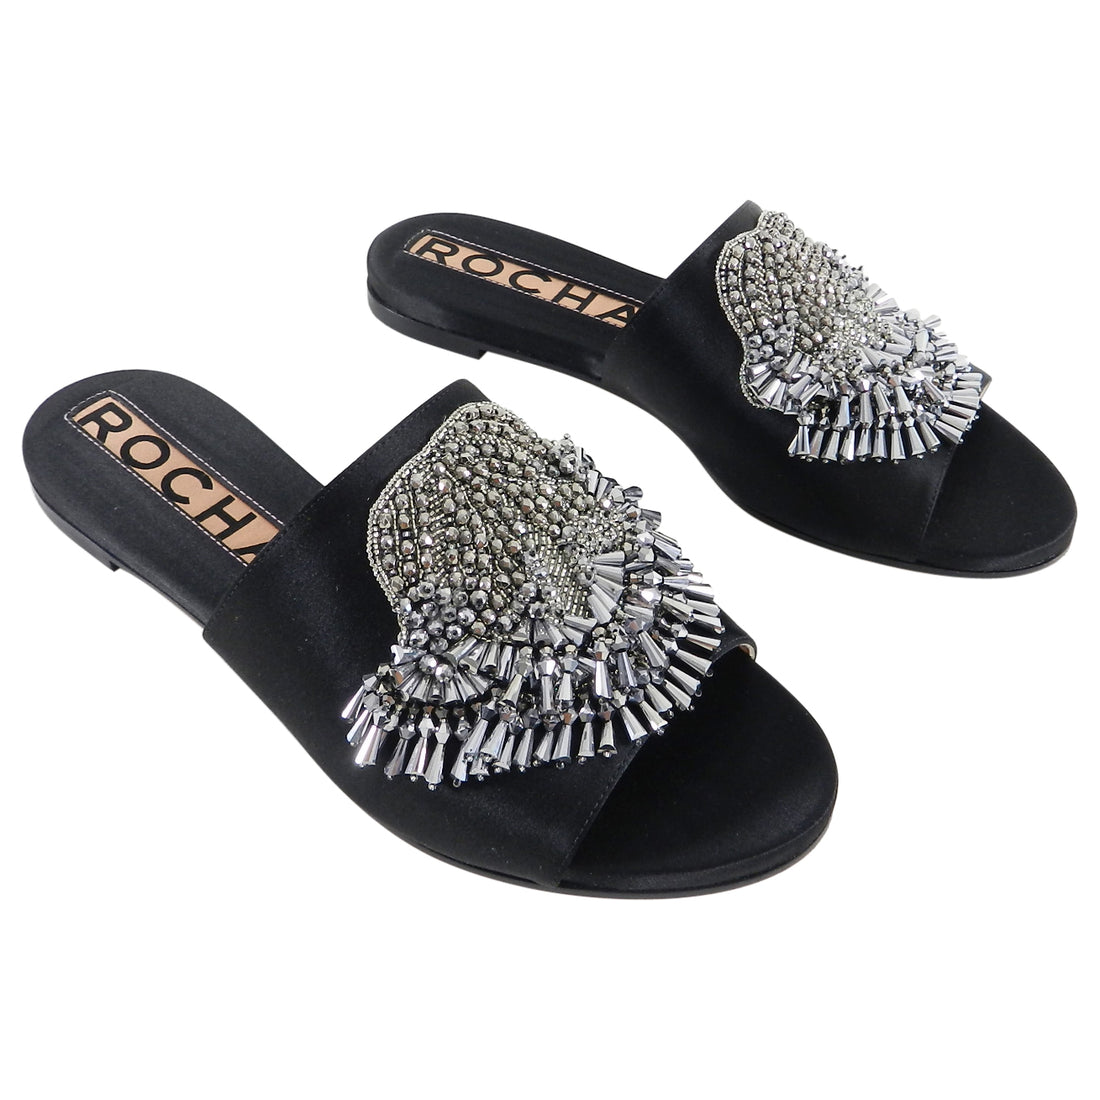 Rochas Black Satin Flat Slide Sandals with Silver Beads - 37